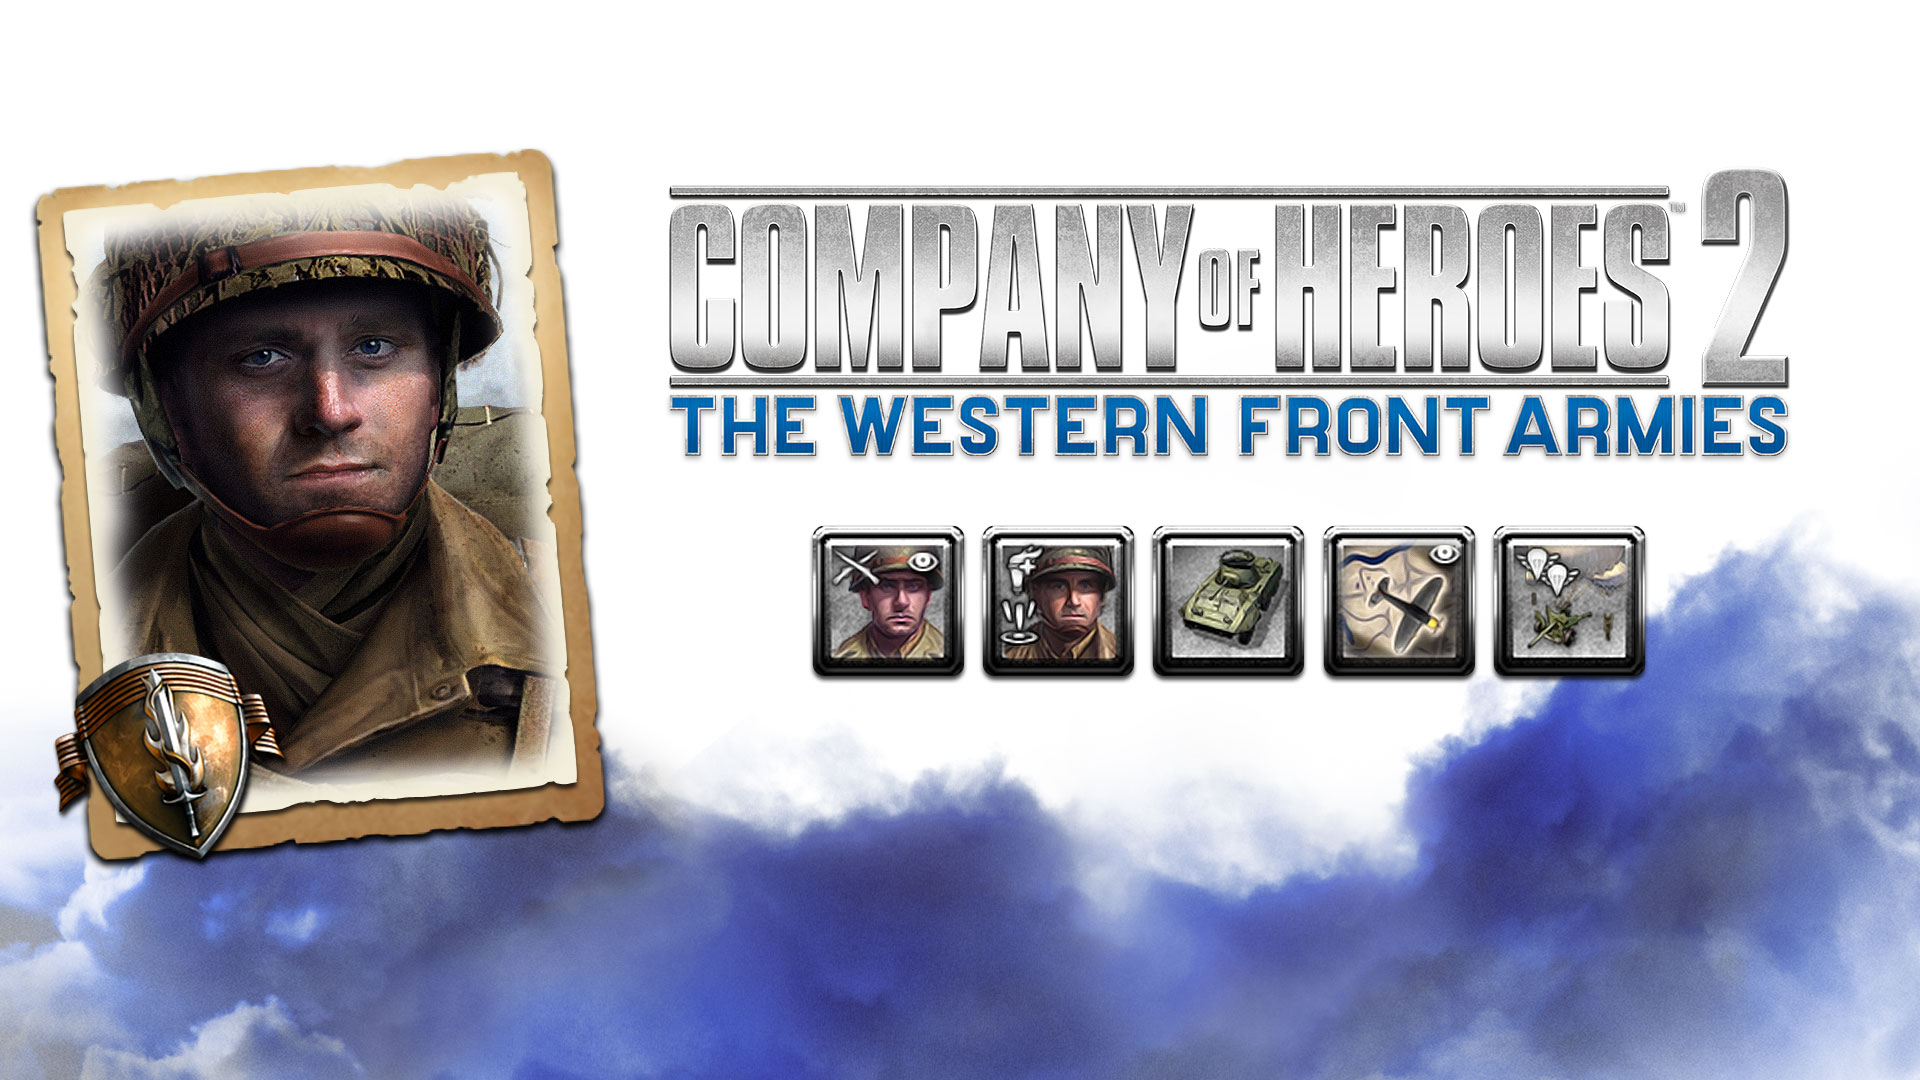 Company of Heroes 2 - US Forces Commander: Recon Support Company DLC Steam CD Key 10.16 $